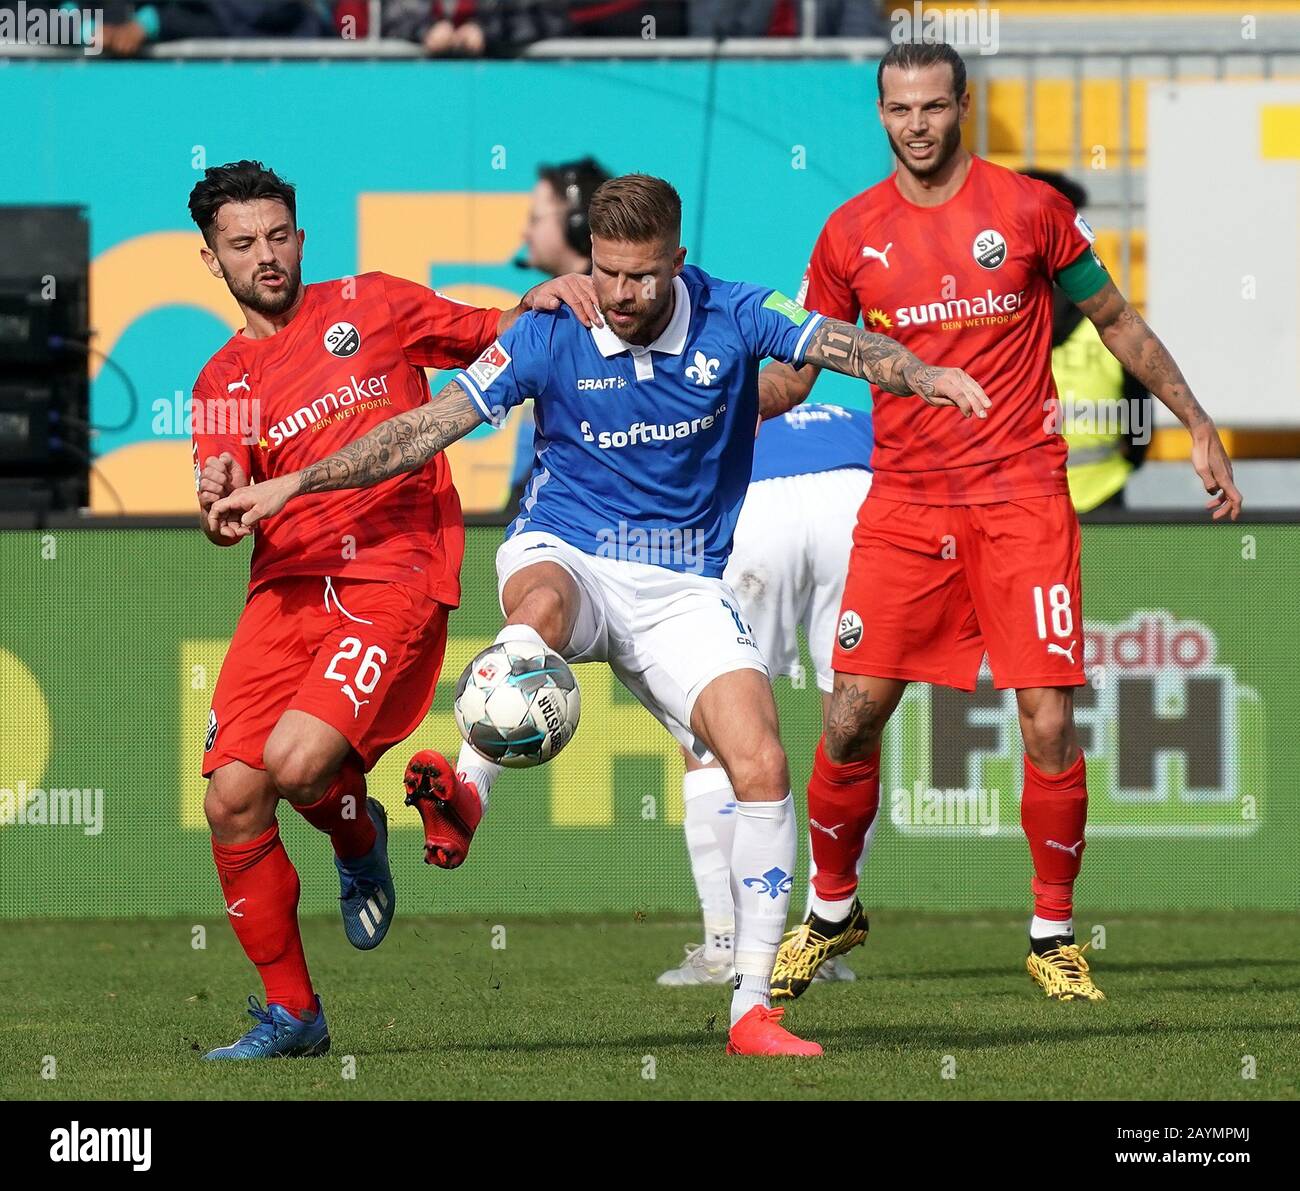 Darmstadt, Germany. 16th Feb, 2020. Football: 2nd Bundesliga, Darmstadt 98 - SV Sandhausen, 22nd matchday in the Merck Stadium: Darmstadt's Tobias Kempe (M) secures the ball against Dennis Diekmeier (r) and Besar Halimi (l) from Sandhausen. Credit: Hasan Bratic/dpa - IMPORTANT NOTE: In accordance with the regulations of the DFL Deutsche Fußball Liga and the DFB Deutscher Fußball-Bund, it is prohibited to exploit or have exploited in the stadium and/or from the game taken photographs in the form of sequence images and/or video-like photo series./dpa/Alamy Live News Stock Photo